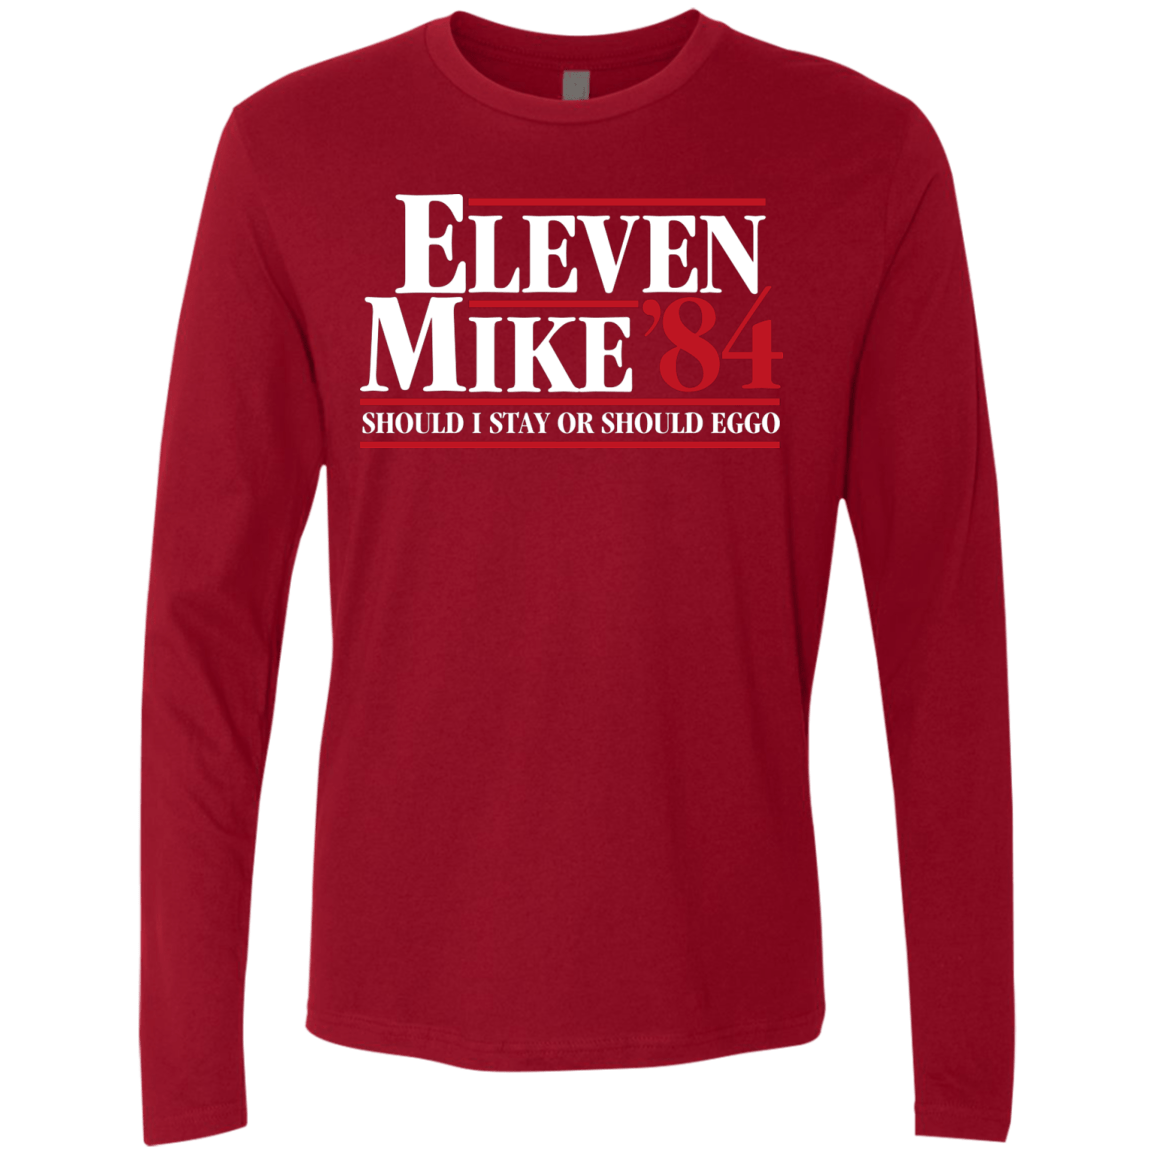 T-Shirts Cardinal / Small Eleven Mike 84 - Should I Stay or Should Eggo Men's Premium Long Sleeve